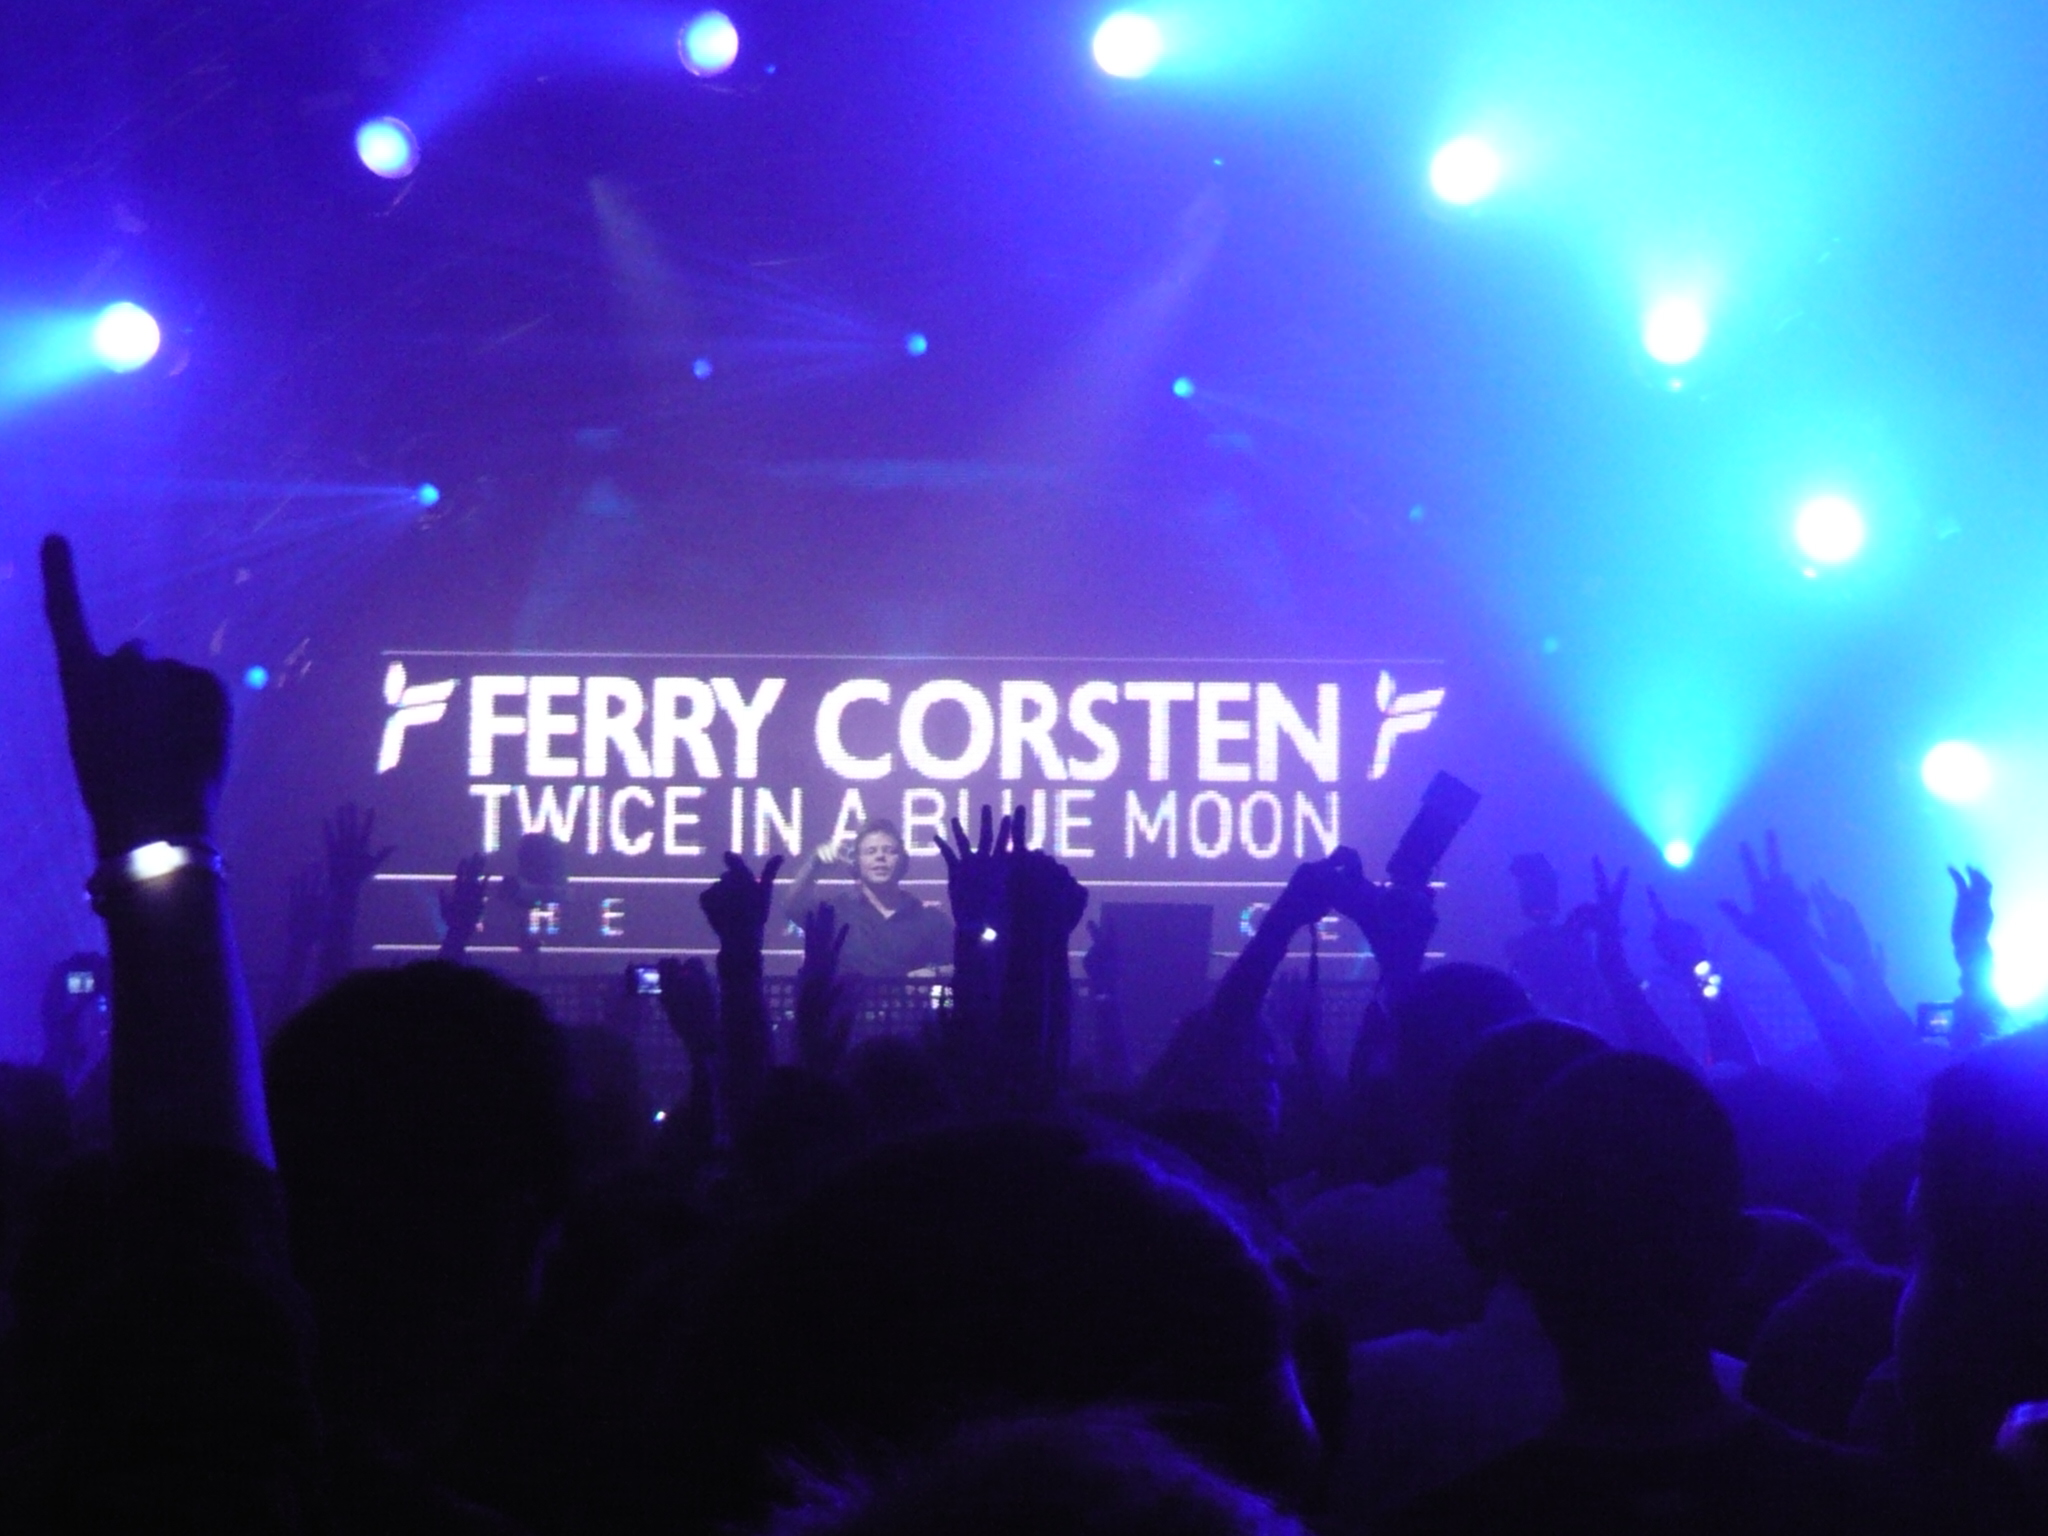 Ferry Corsten Live Images amp Pictures   Becuo